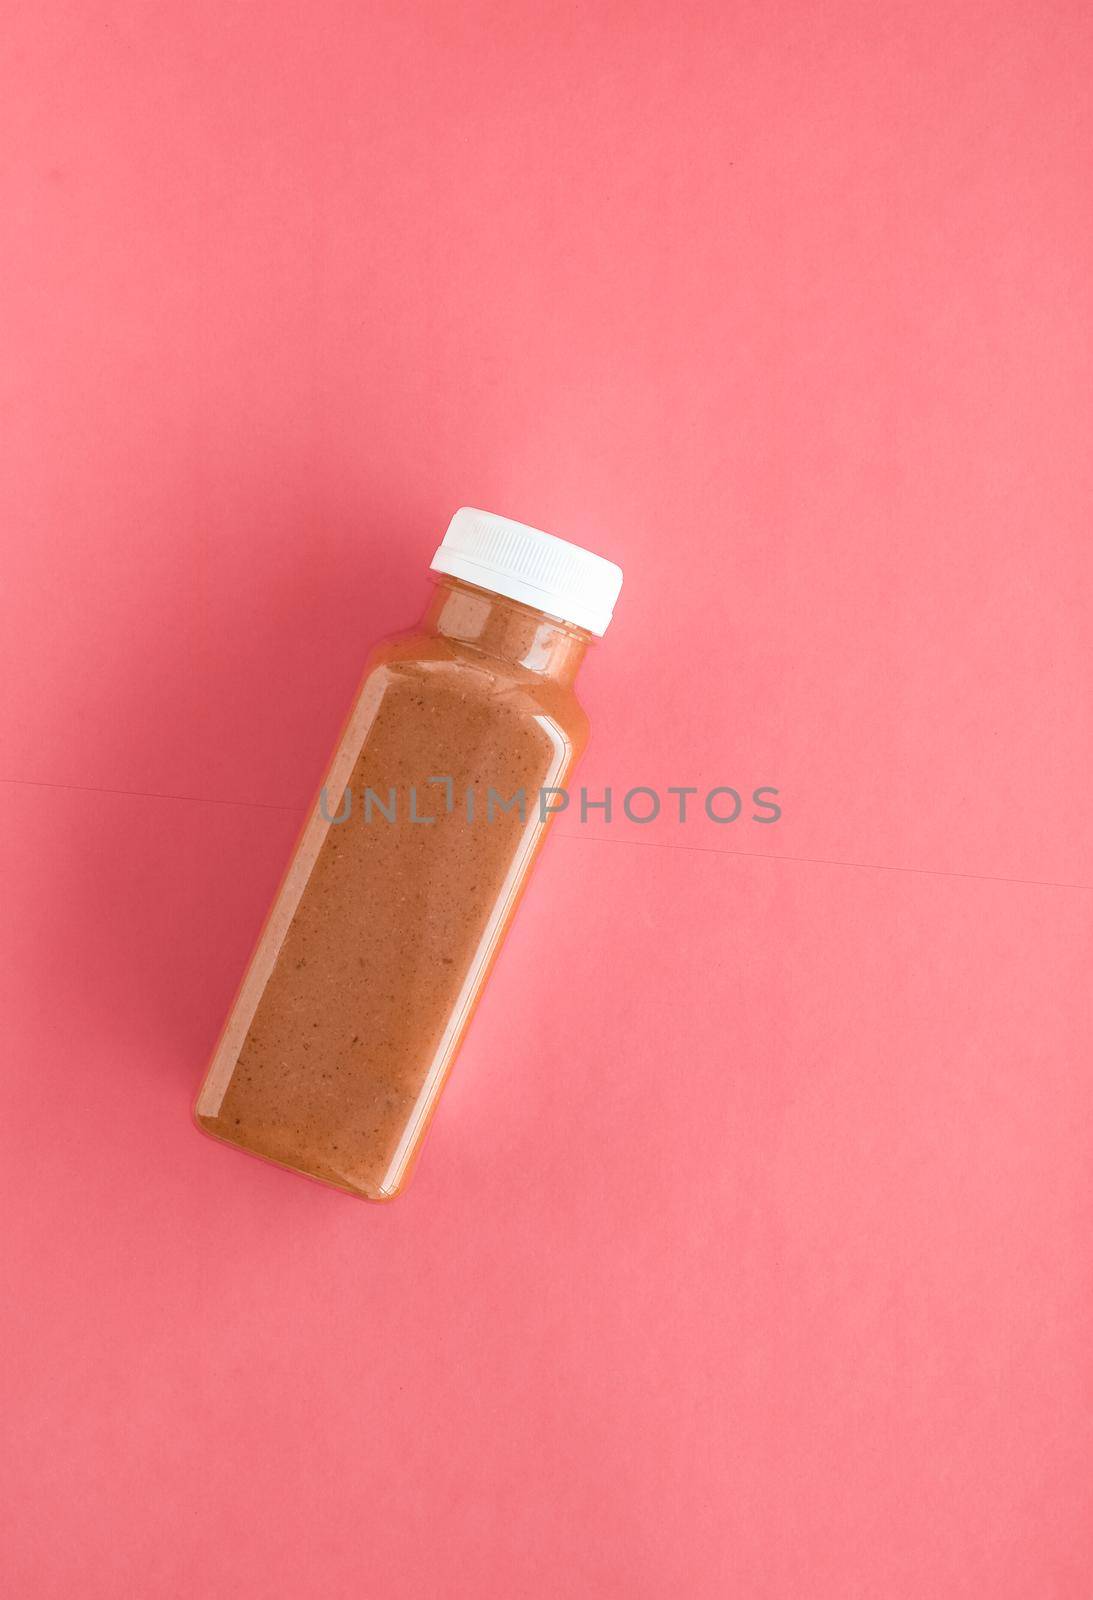 Diet menu, dieting program, and juice catering concept - Detox superfood chocolate smoothie bottle for weight loss cleanse on.coral background, flatlay design for food and nutrition expert blog